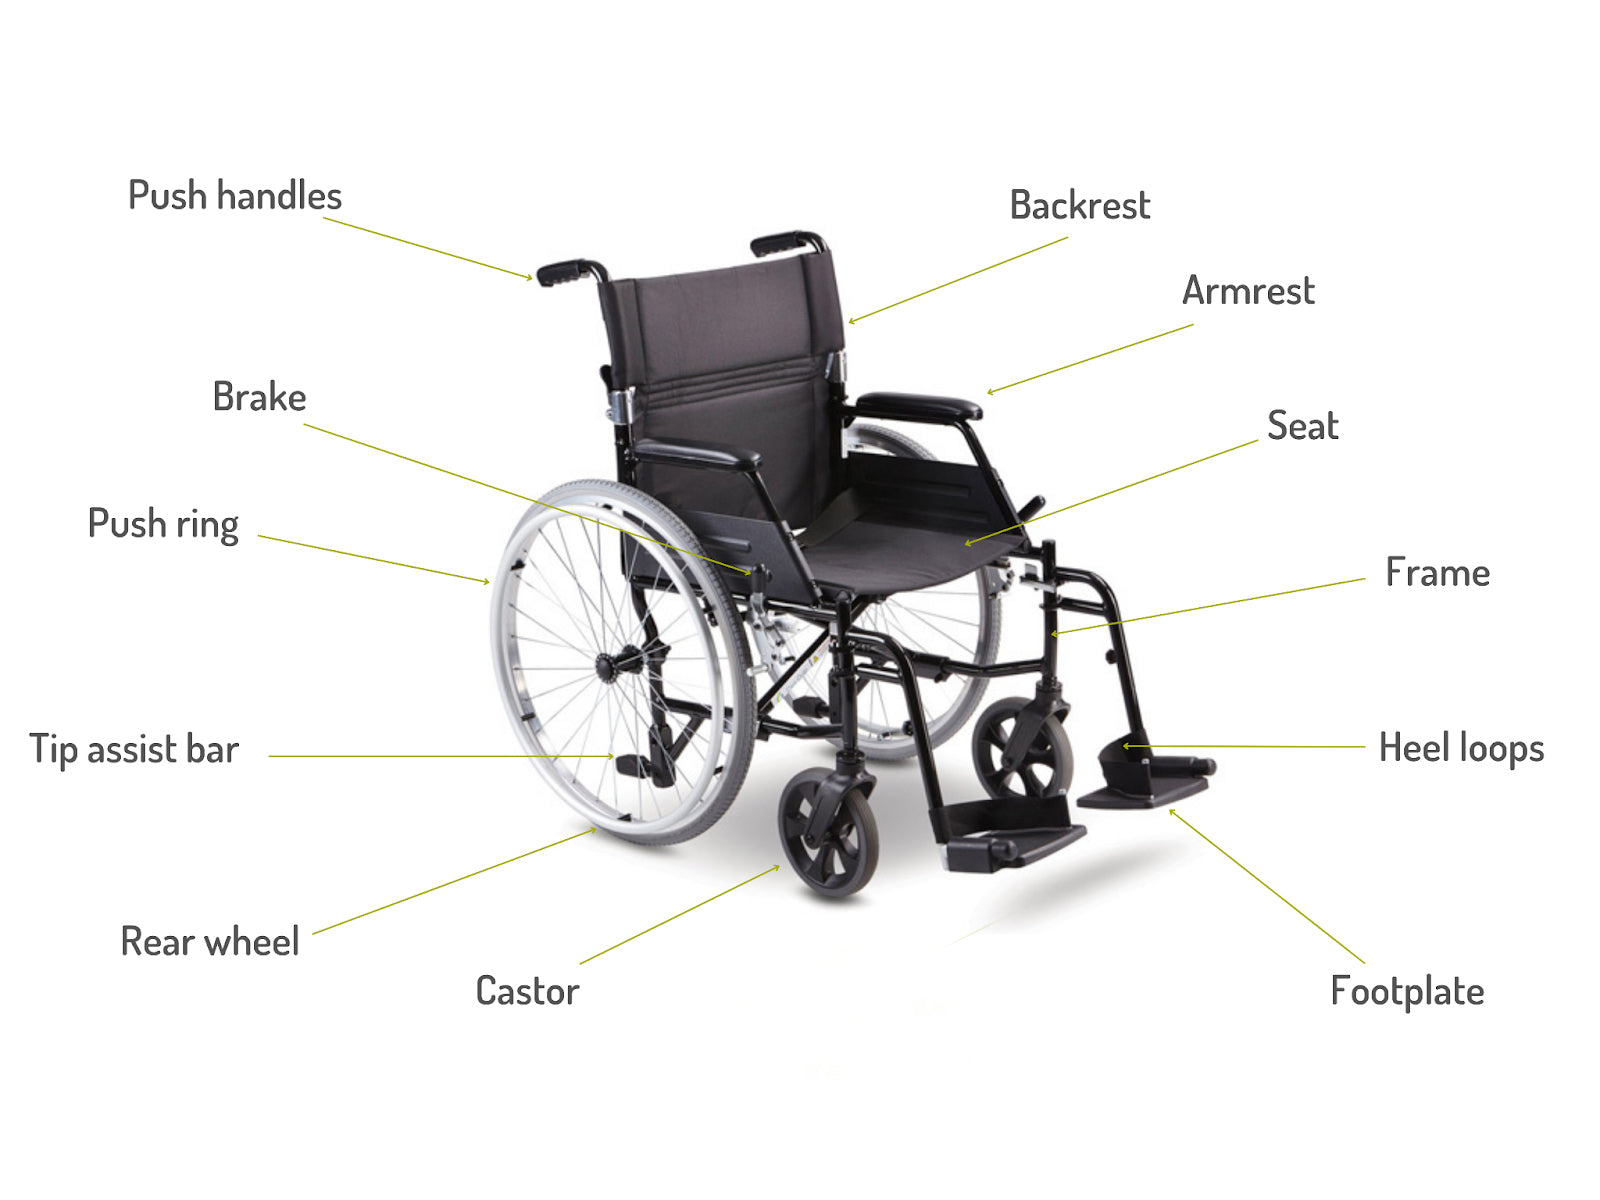 Wheelchair diagrams - understanding what makes up your wheelchair.